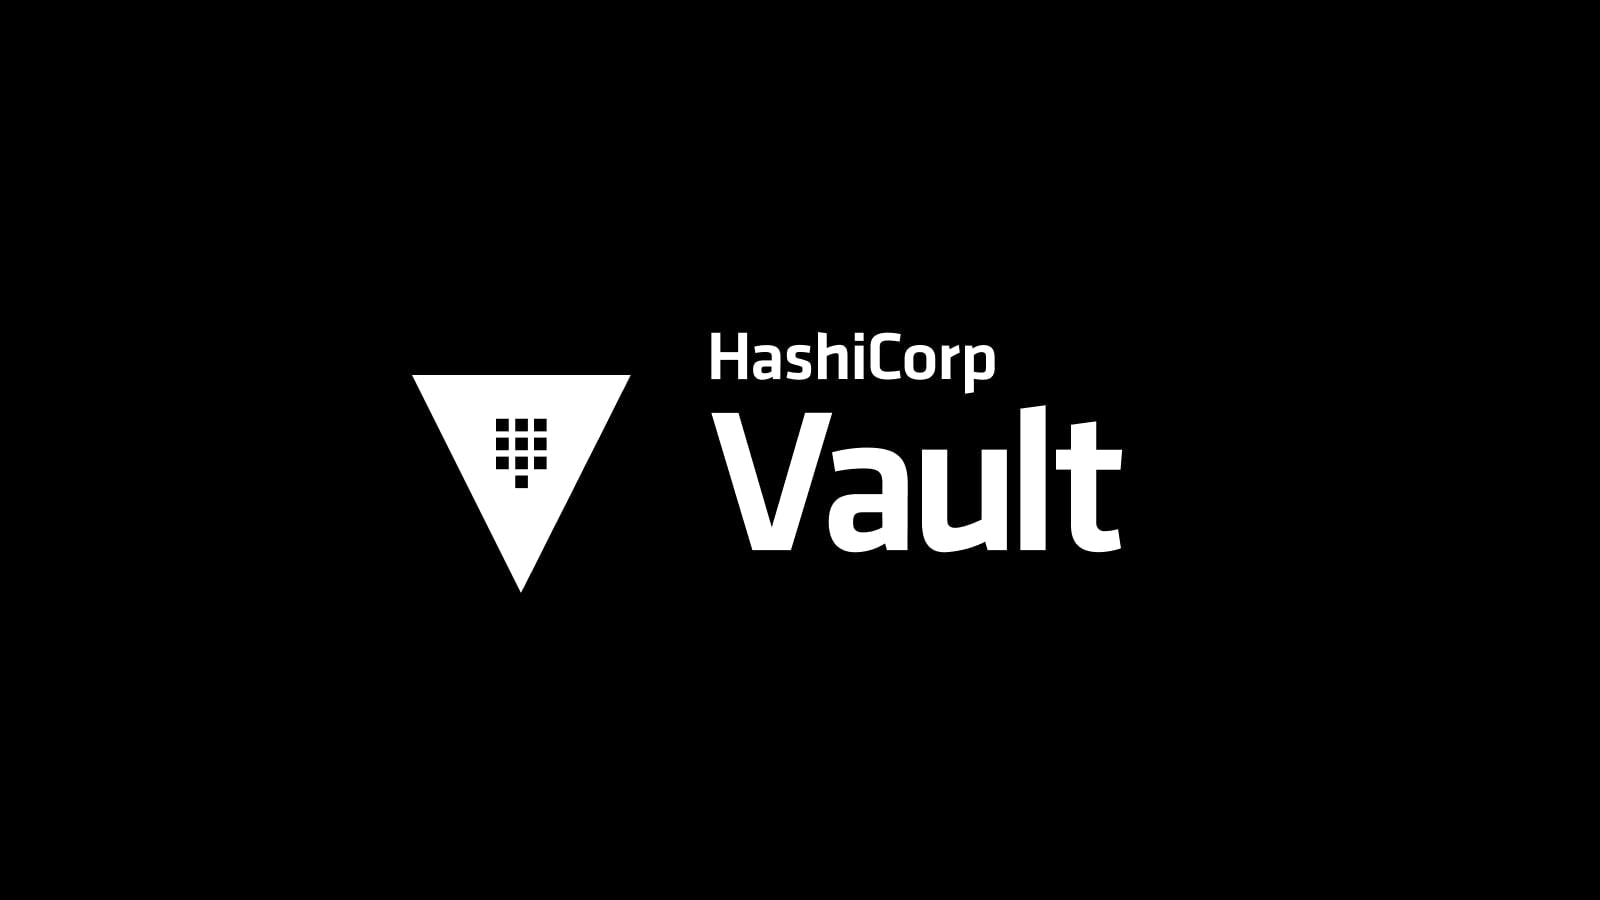 HashiCorp Vault 1.10 Achieves FIPS 140-2 Compliance